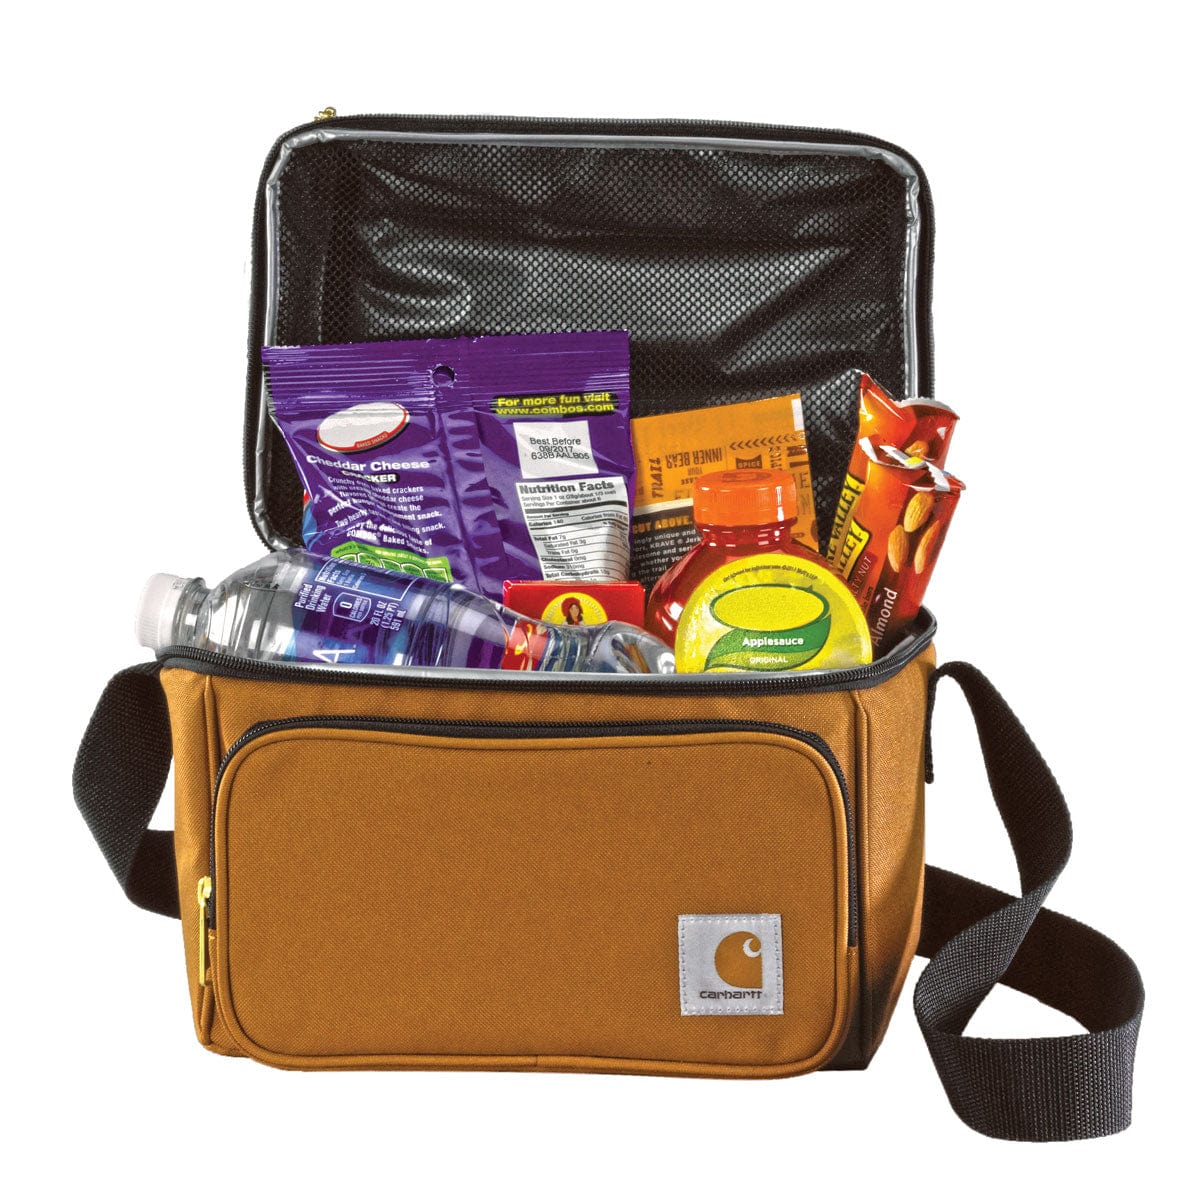 Carhartt Legacy Deluxe Lunch Cooler-FG